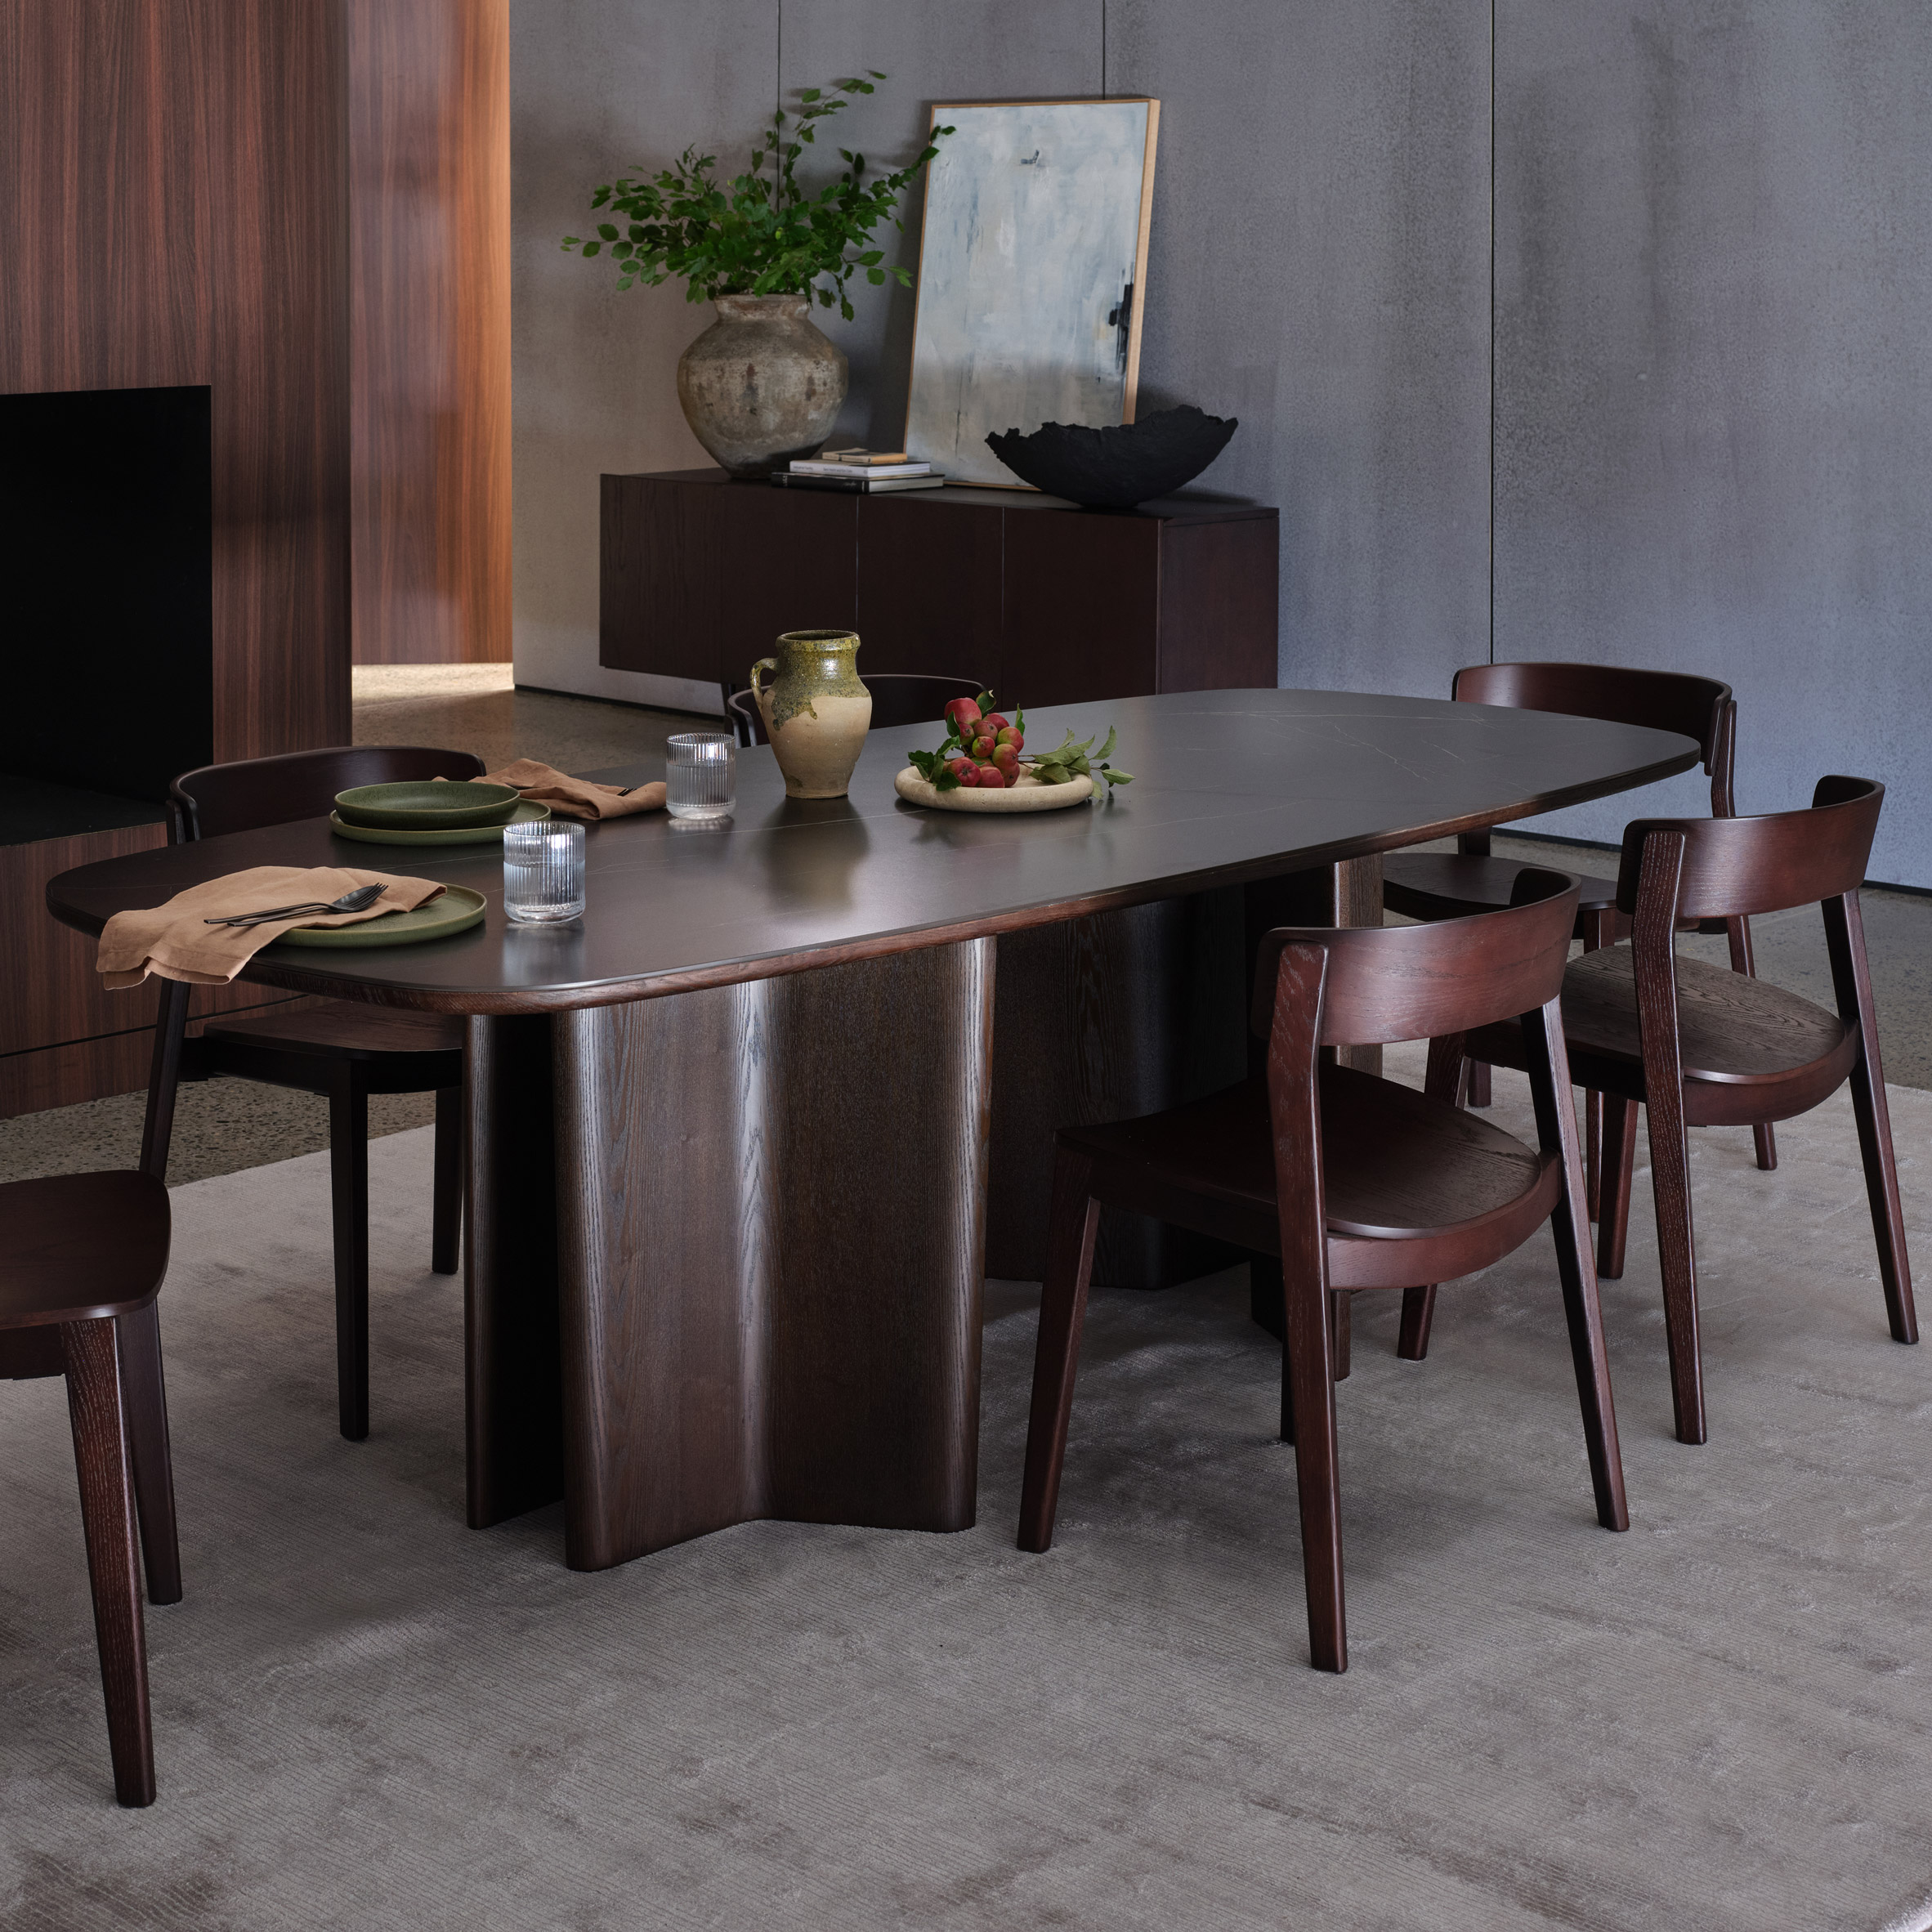 Issho de King dining table with dining chairs around